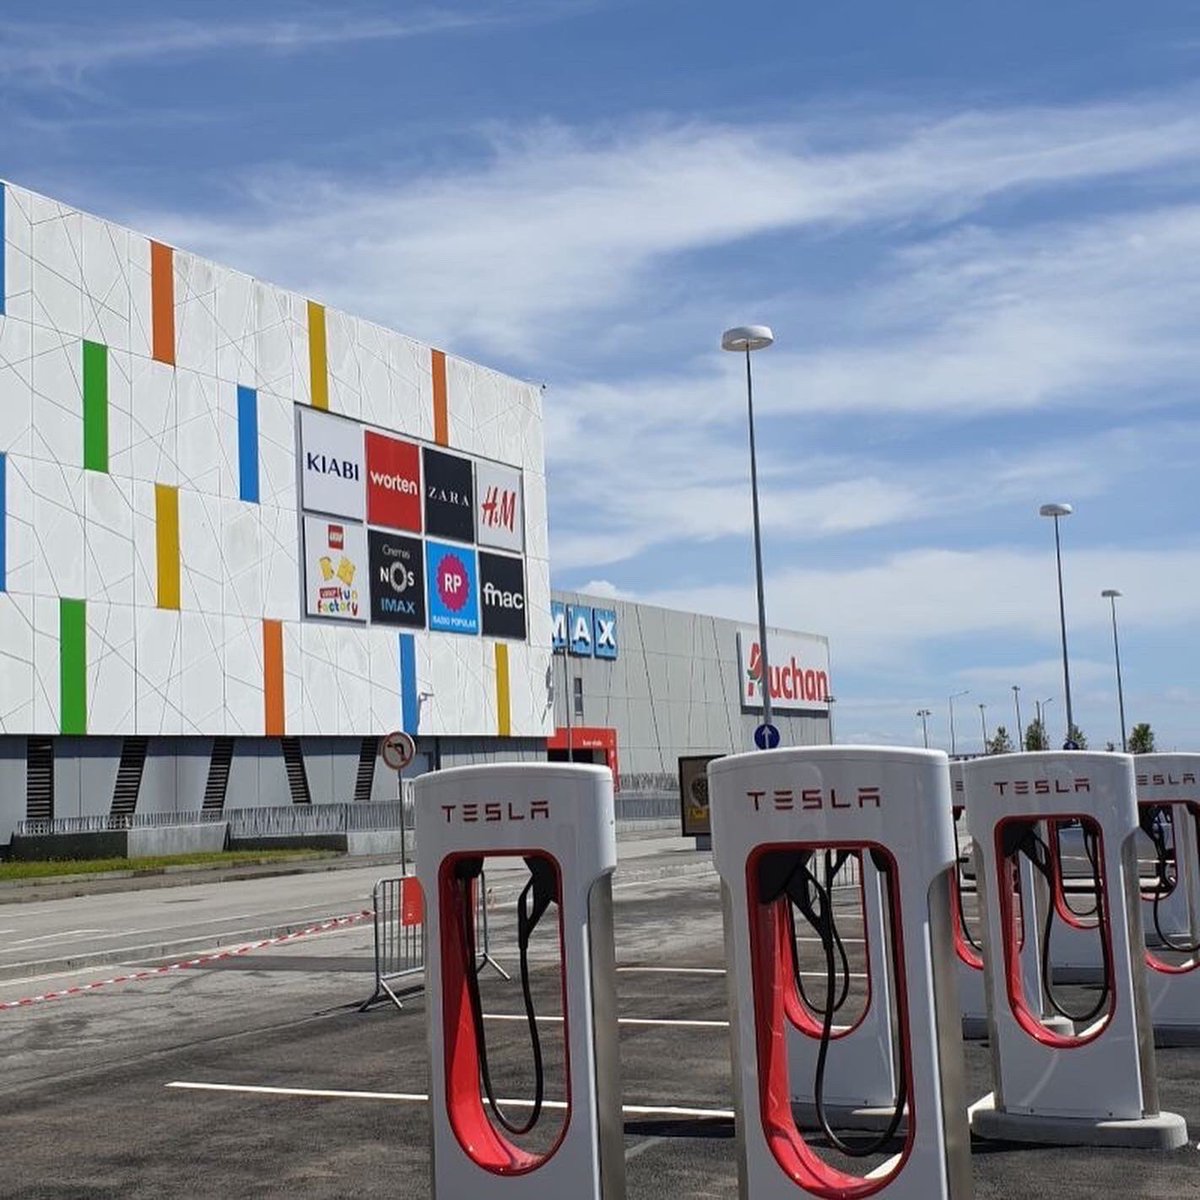 New Tesla superchargers installed at #Marshopping with our Masterpiece Omniflow (Smart IOT Lampposts) in the background. #IOT #SustainableSolution #SmartCities #Sustainability #co2neutral #co2reduction #5G #VAS #DigitalServices #Renewable #renewableenergy #Tesla #teslachargers